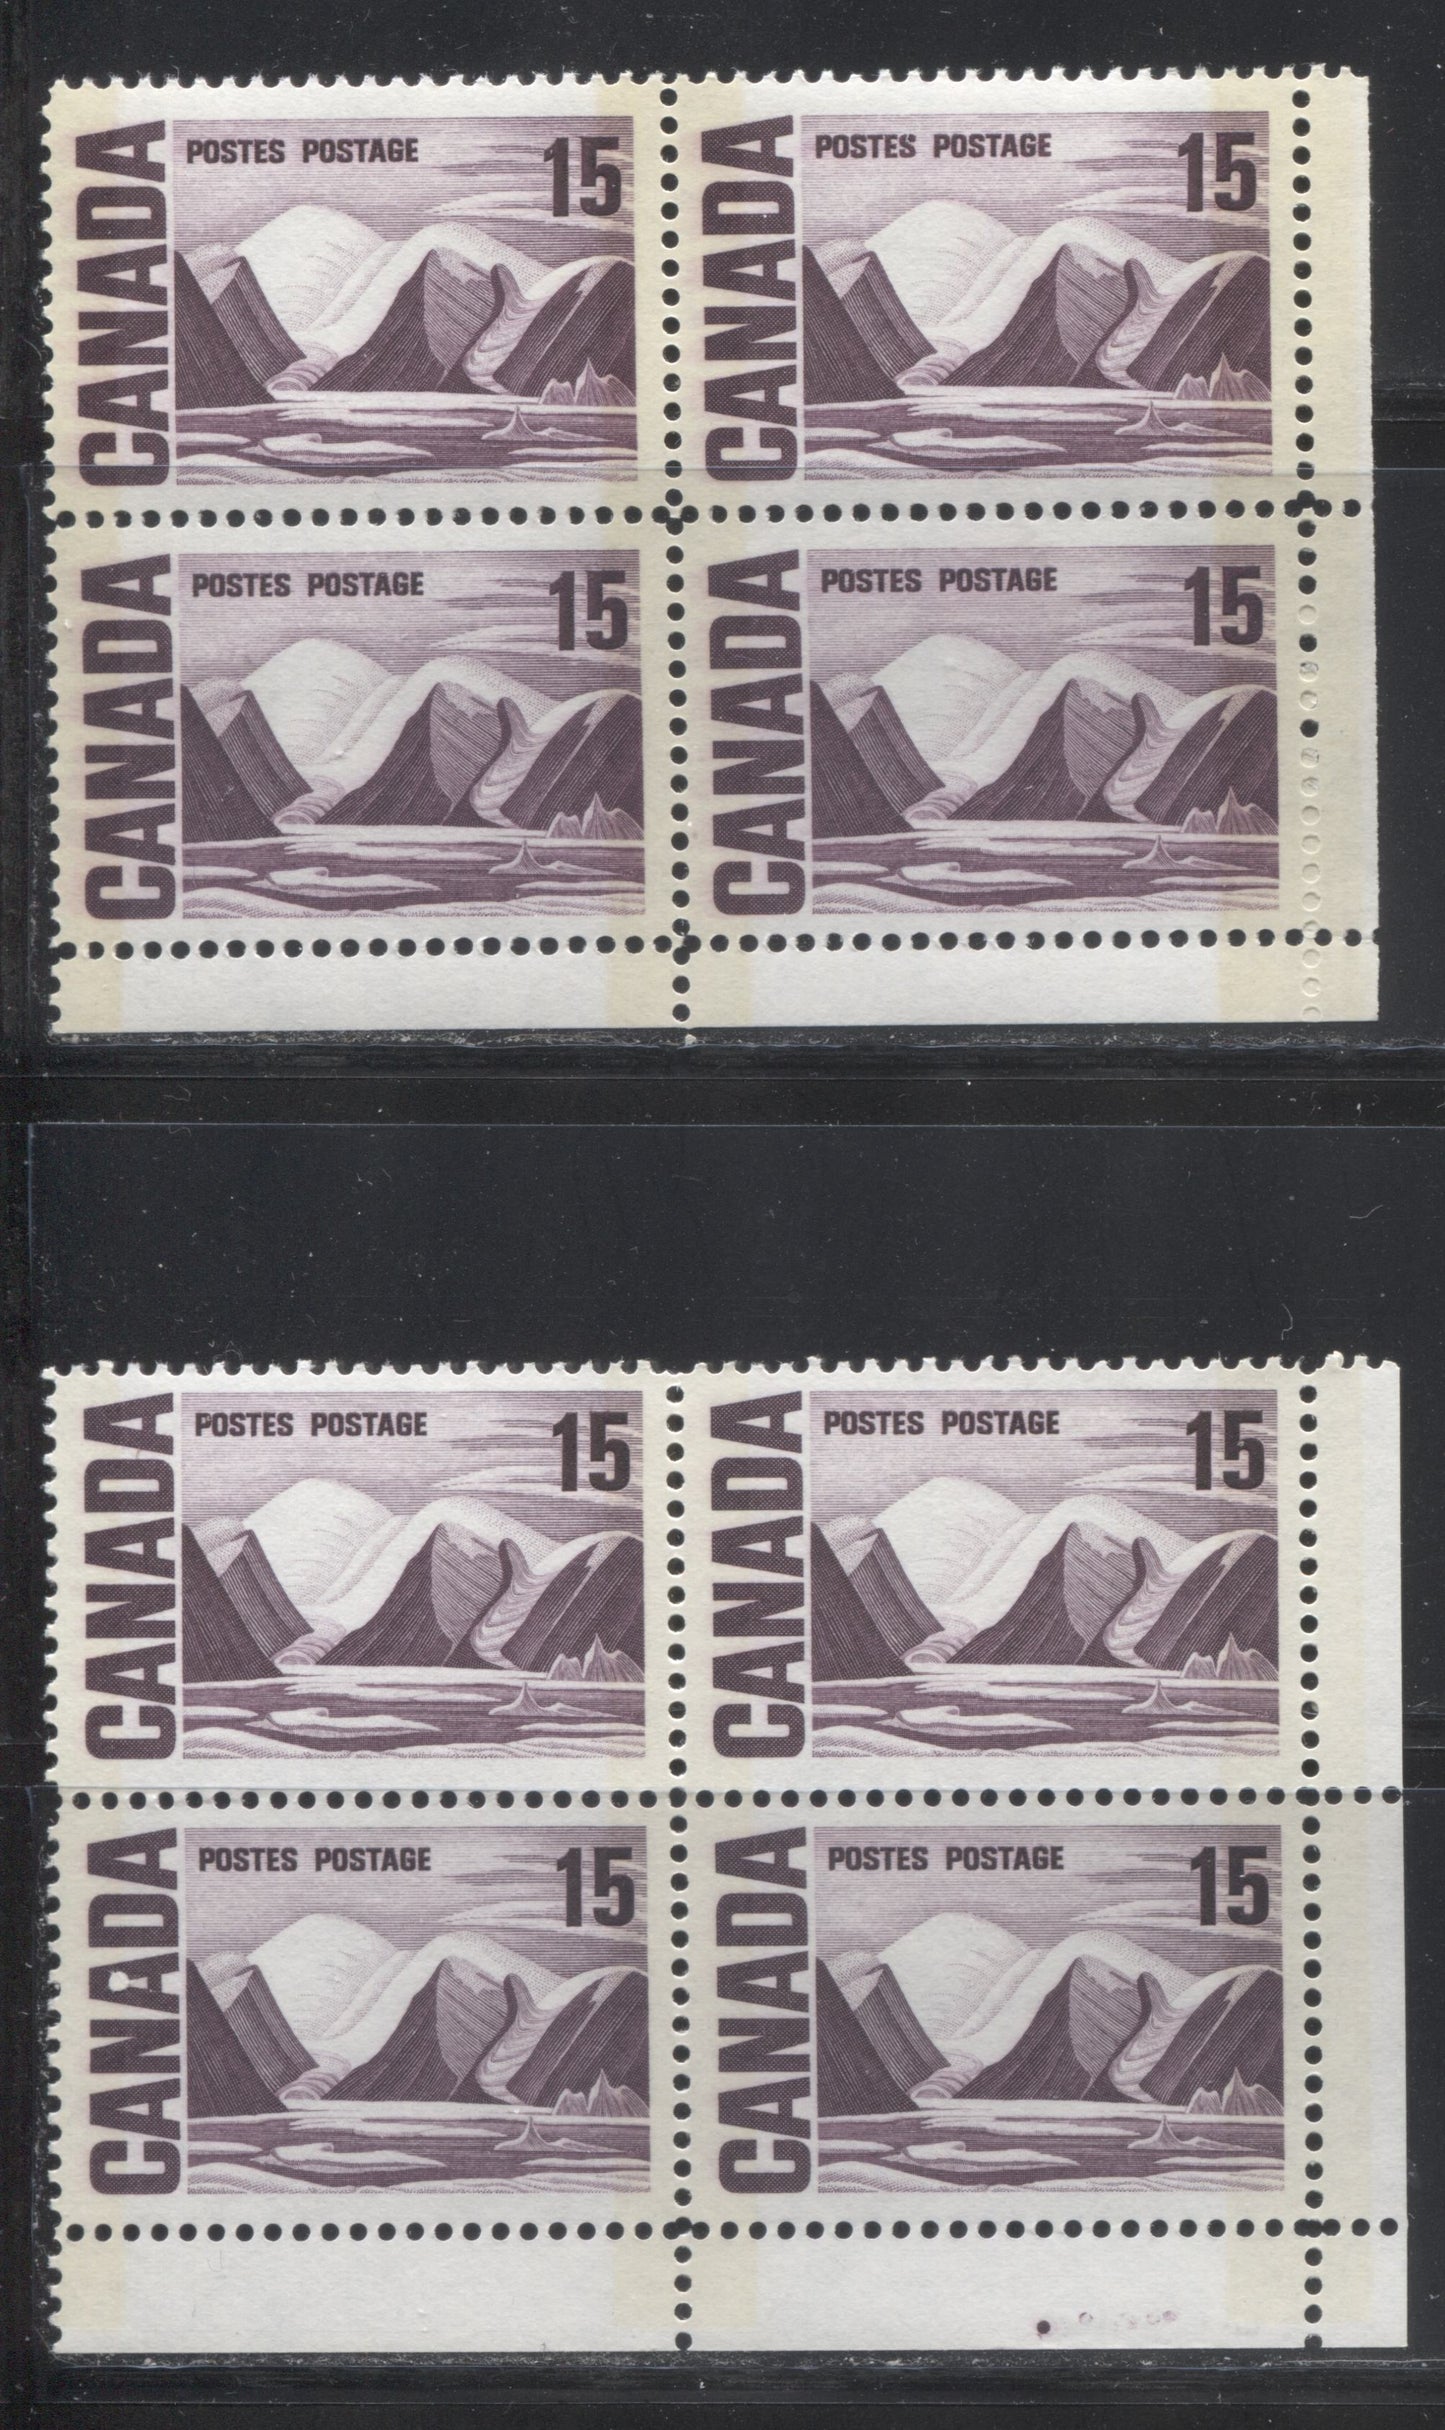 Lot 51 Canada #463piii 15c Bright Reddish Lilac & Bright Plum Greenland Mountains, 1967-1973 Centennial Definitive Issue, Two VFNH LR W2B Tagged Field Stock Blocks Of 4 On LF Vertical Wove Paper With Eggshell & Satin PVA Gum, With Guide Dot